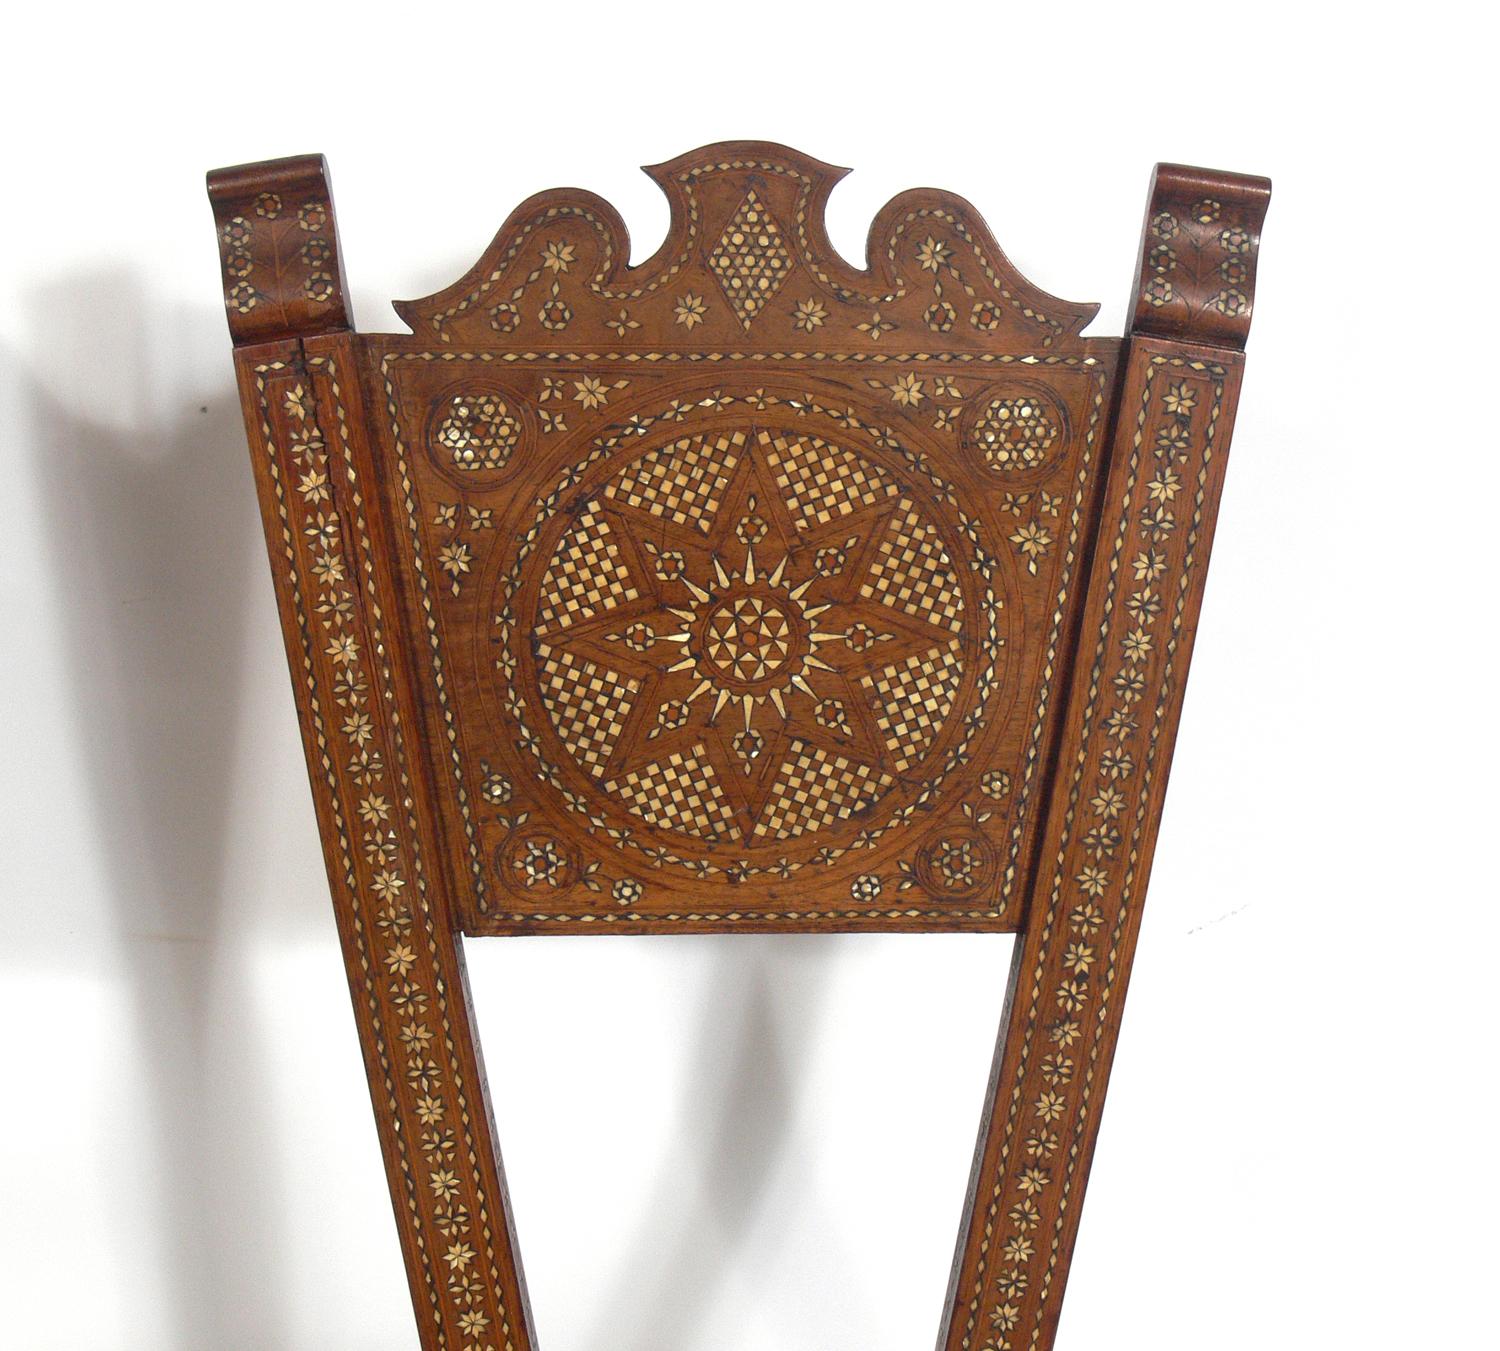 Inlaid Moroccan chair, in the manner of Carlo Bugatti, Moroccan, circa 1950s. They are completely handmade with intricate inlay throughout. They retain their warm original patina.